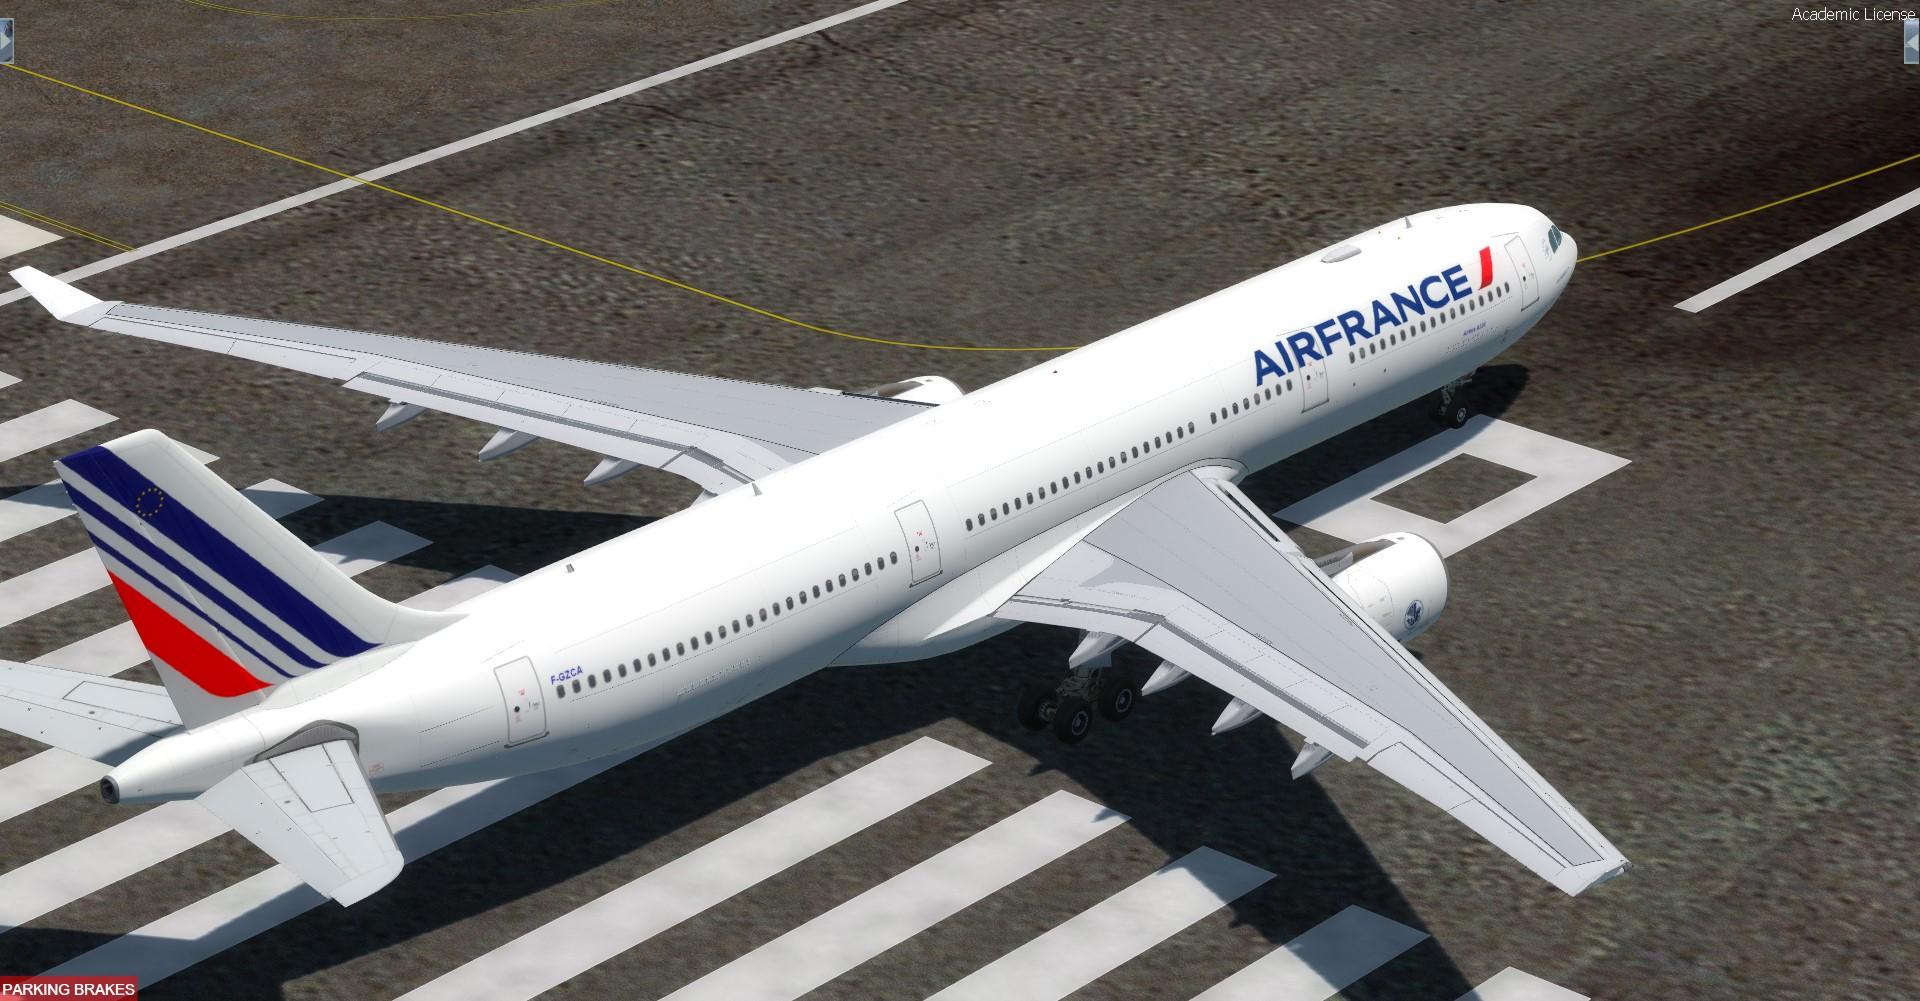 More information about "Air France F-GZCA"